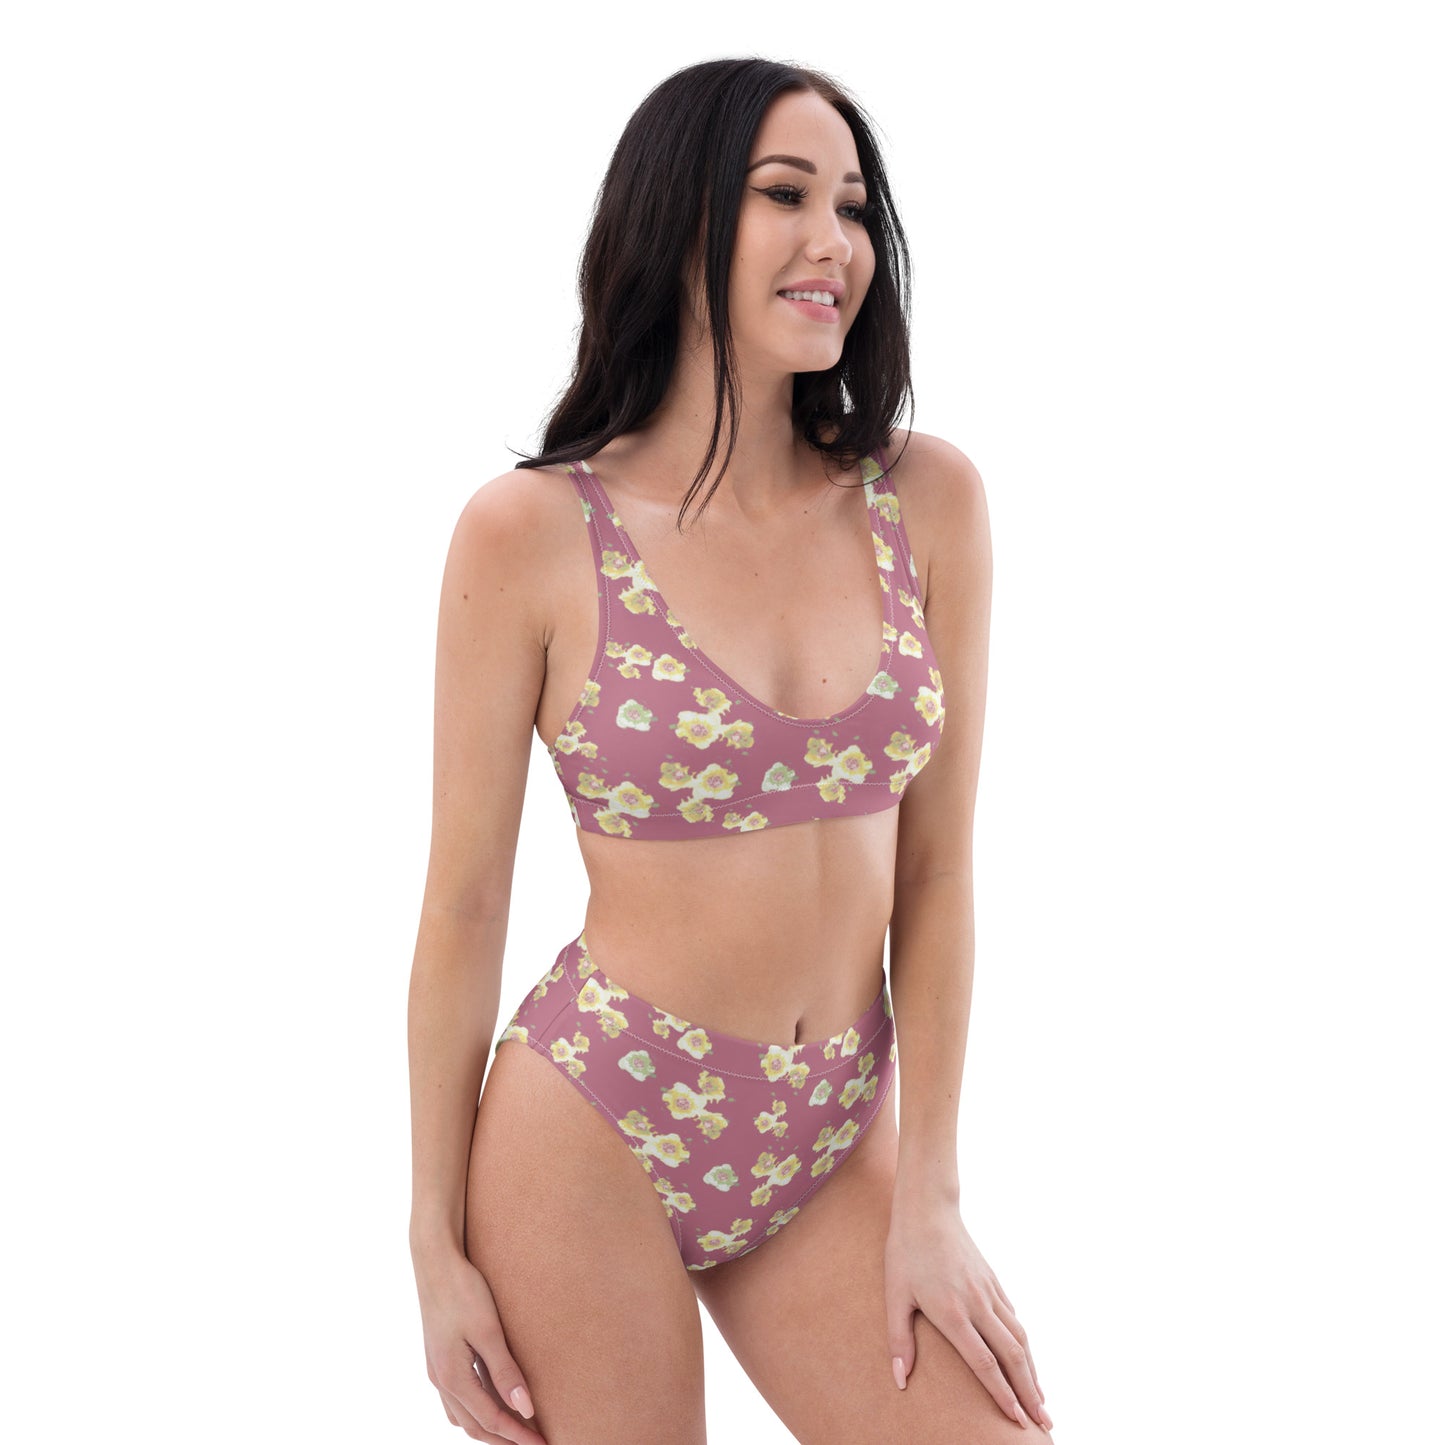 Starburst Floral Recycled high-waisted bikini